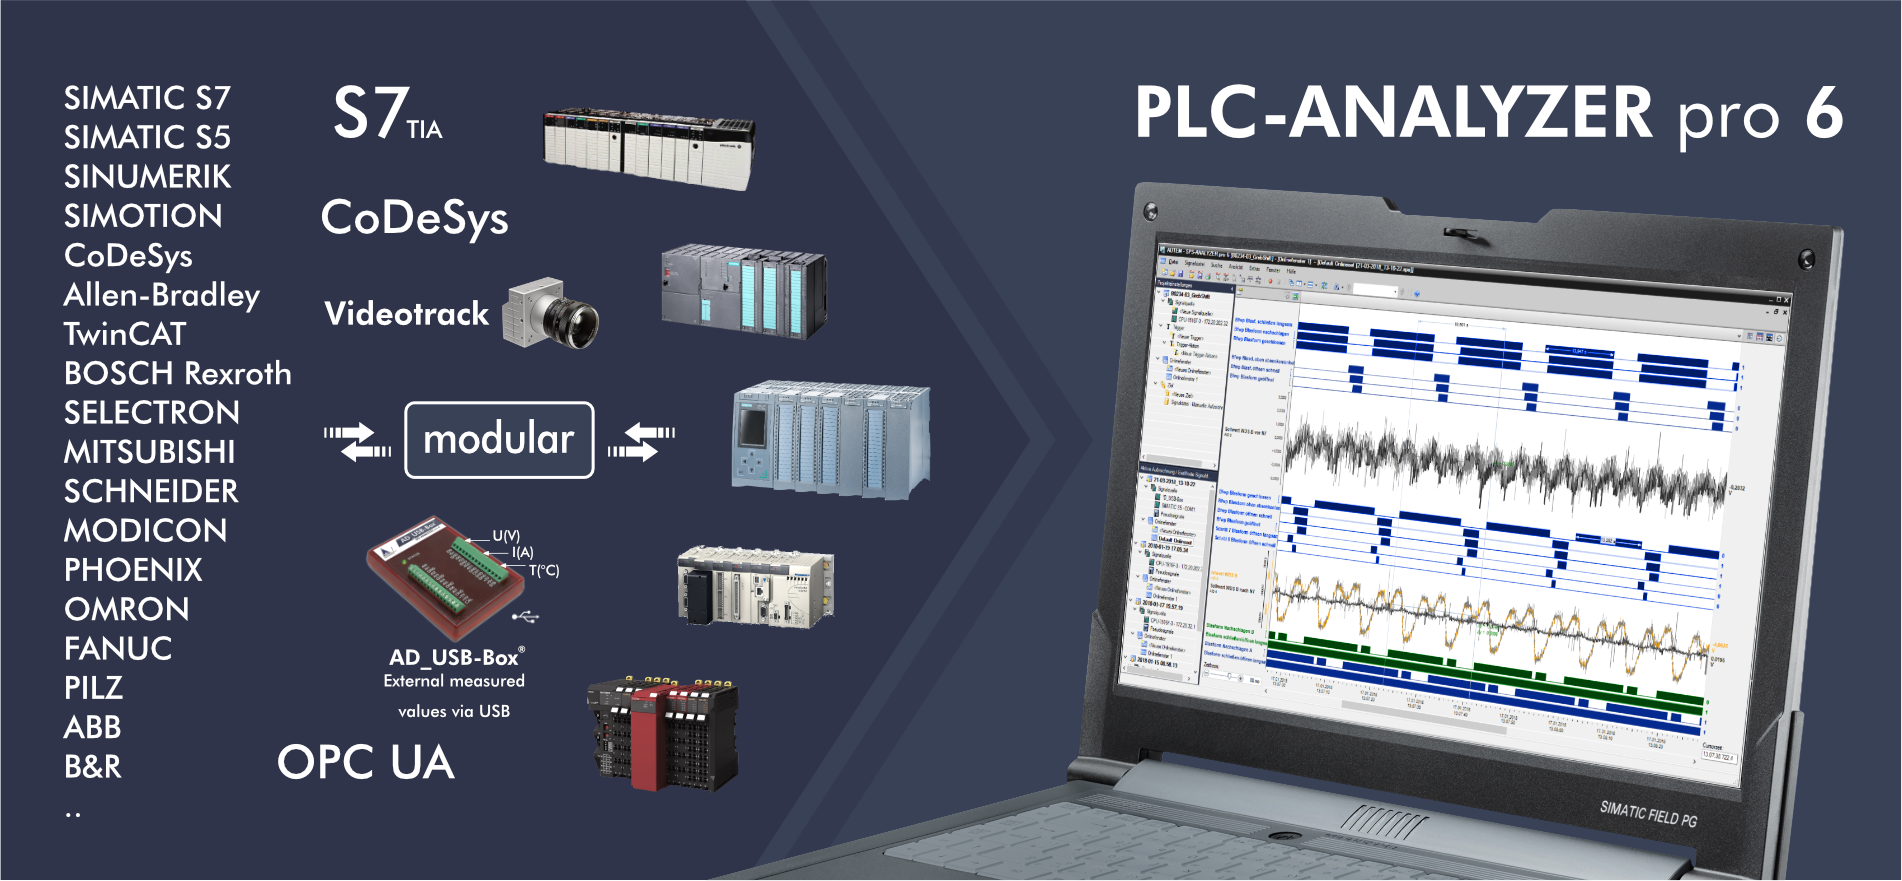 PLC-ANALYZER pro 6: Indispensable aid in everyday industrial use